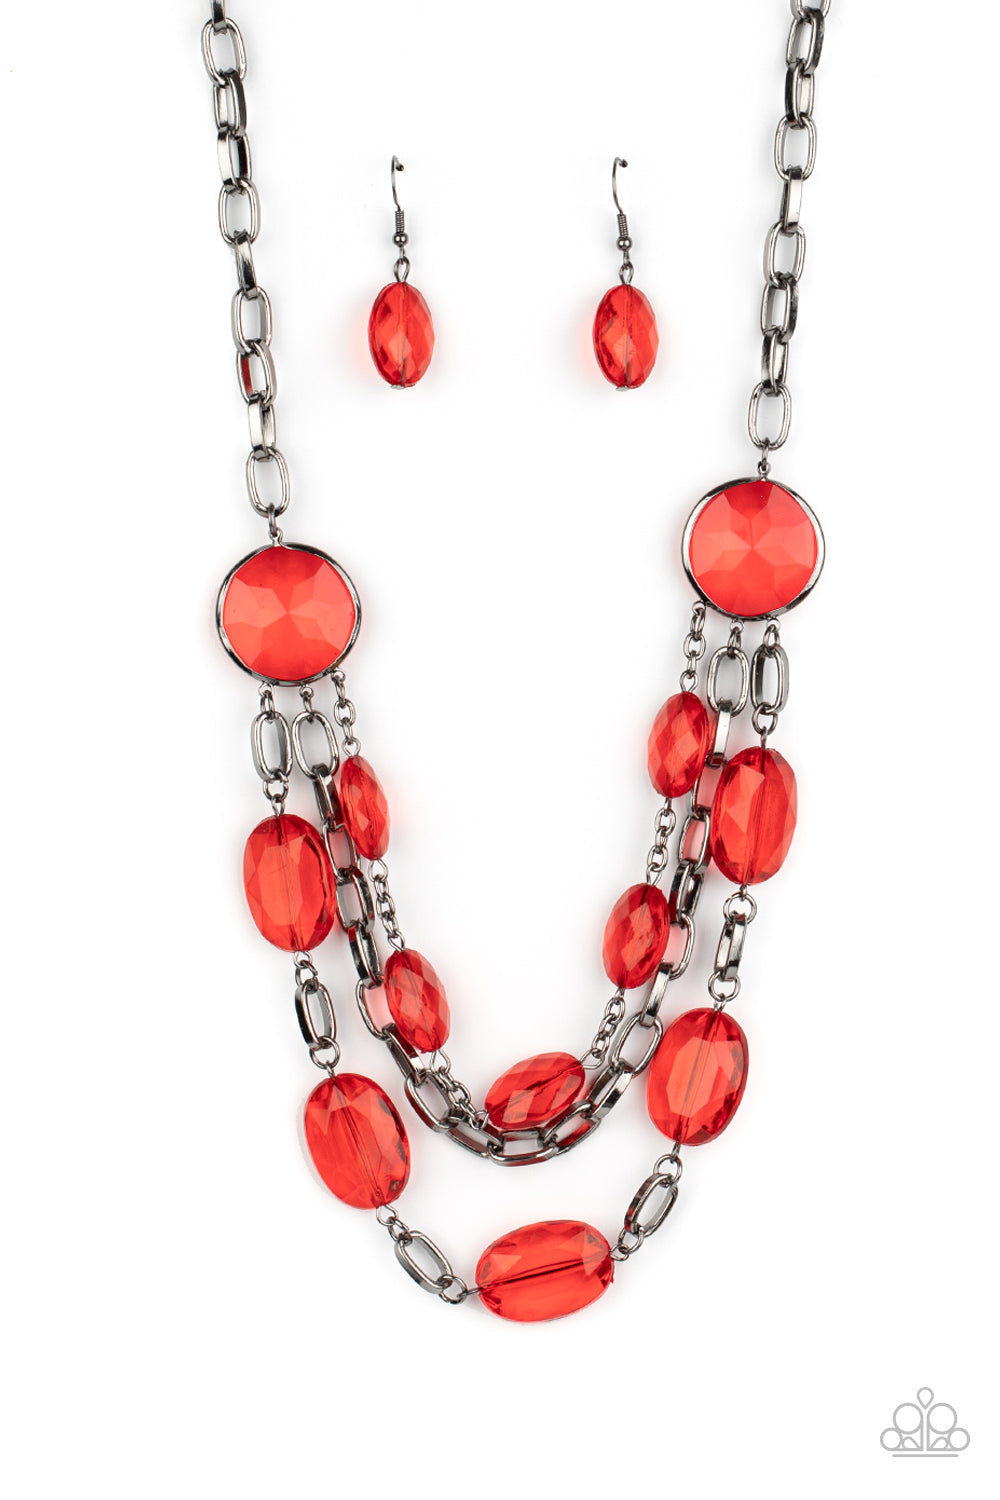 I Need a GLOW-cation - Red and Black Metal Necklace - Paparazzi Accessories - Strung between two matching red gem-like fittings, two glittery rows of red oval gems flank a strand of bold gunmetal chain below the collar for a flawlessly layered look. Features an adjustable clasp closure.